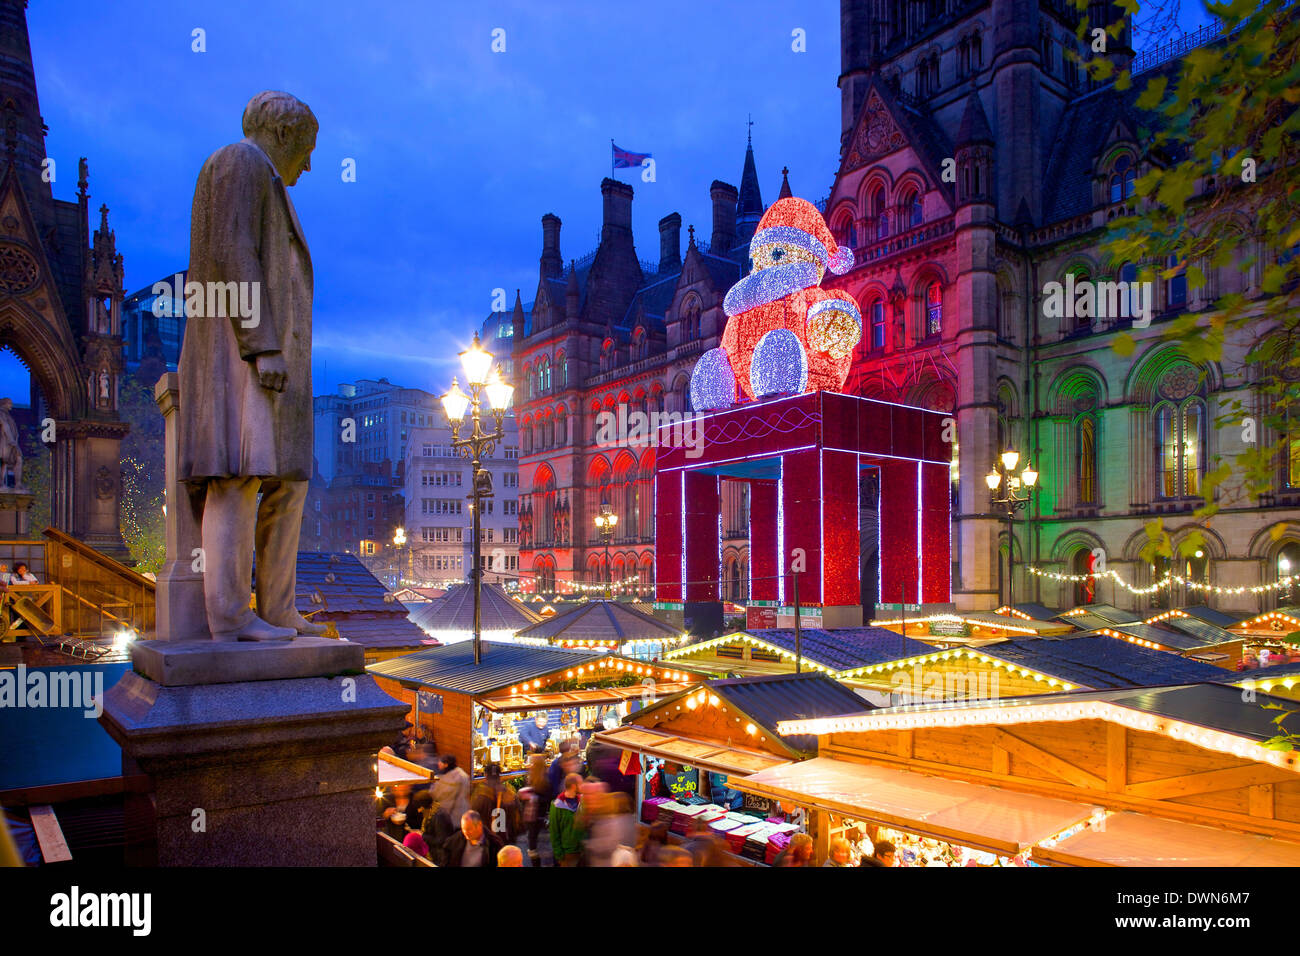 Christmas Market and Town Hall, Albert Square, Manchester, England, United Kingdom, Europe Stock Photo